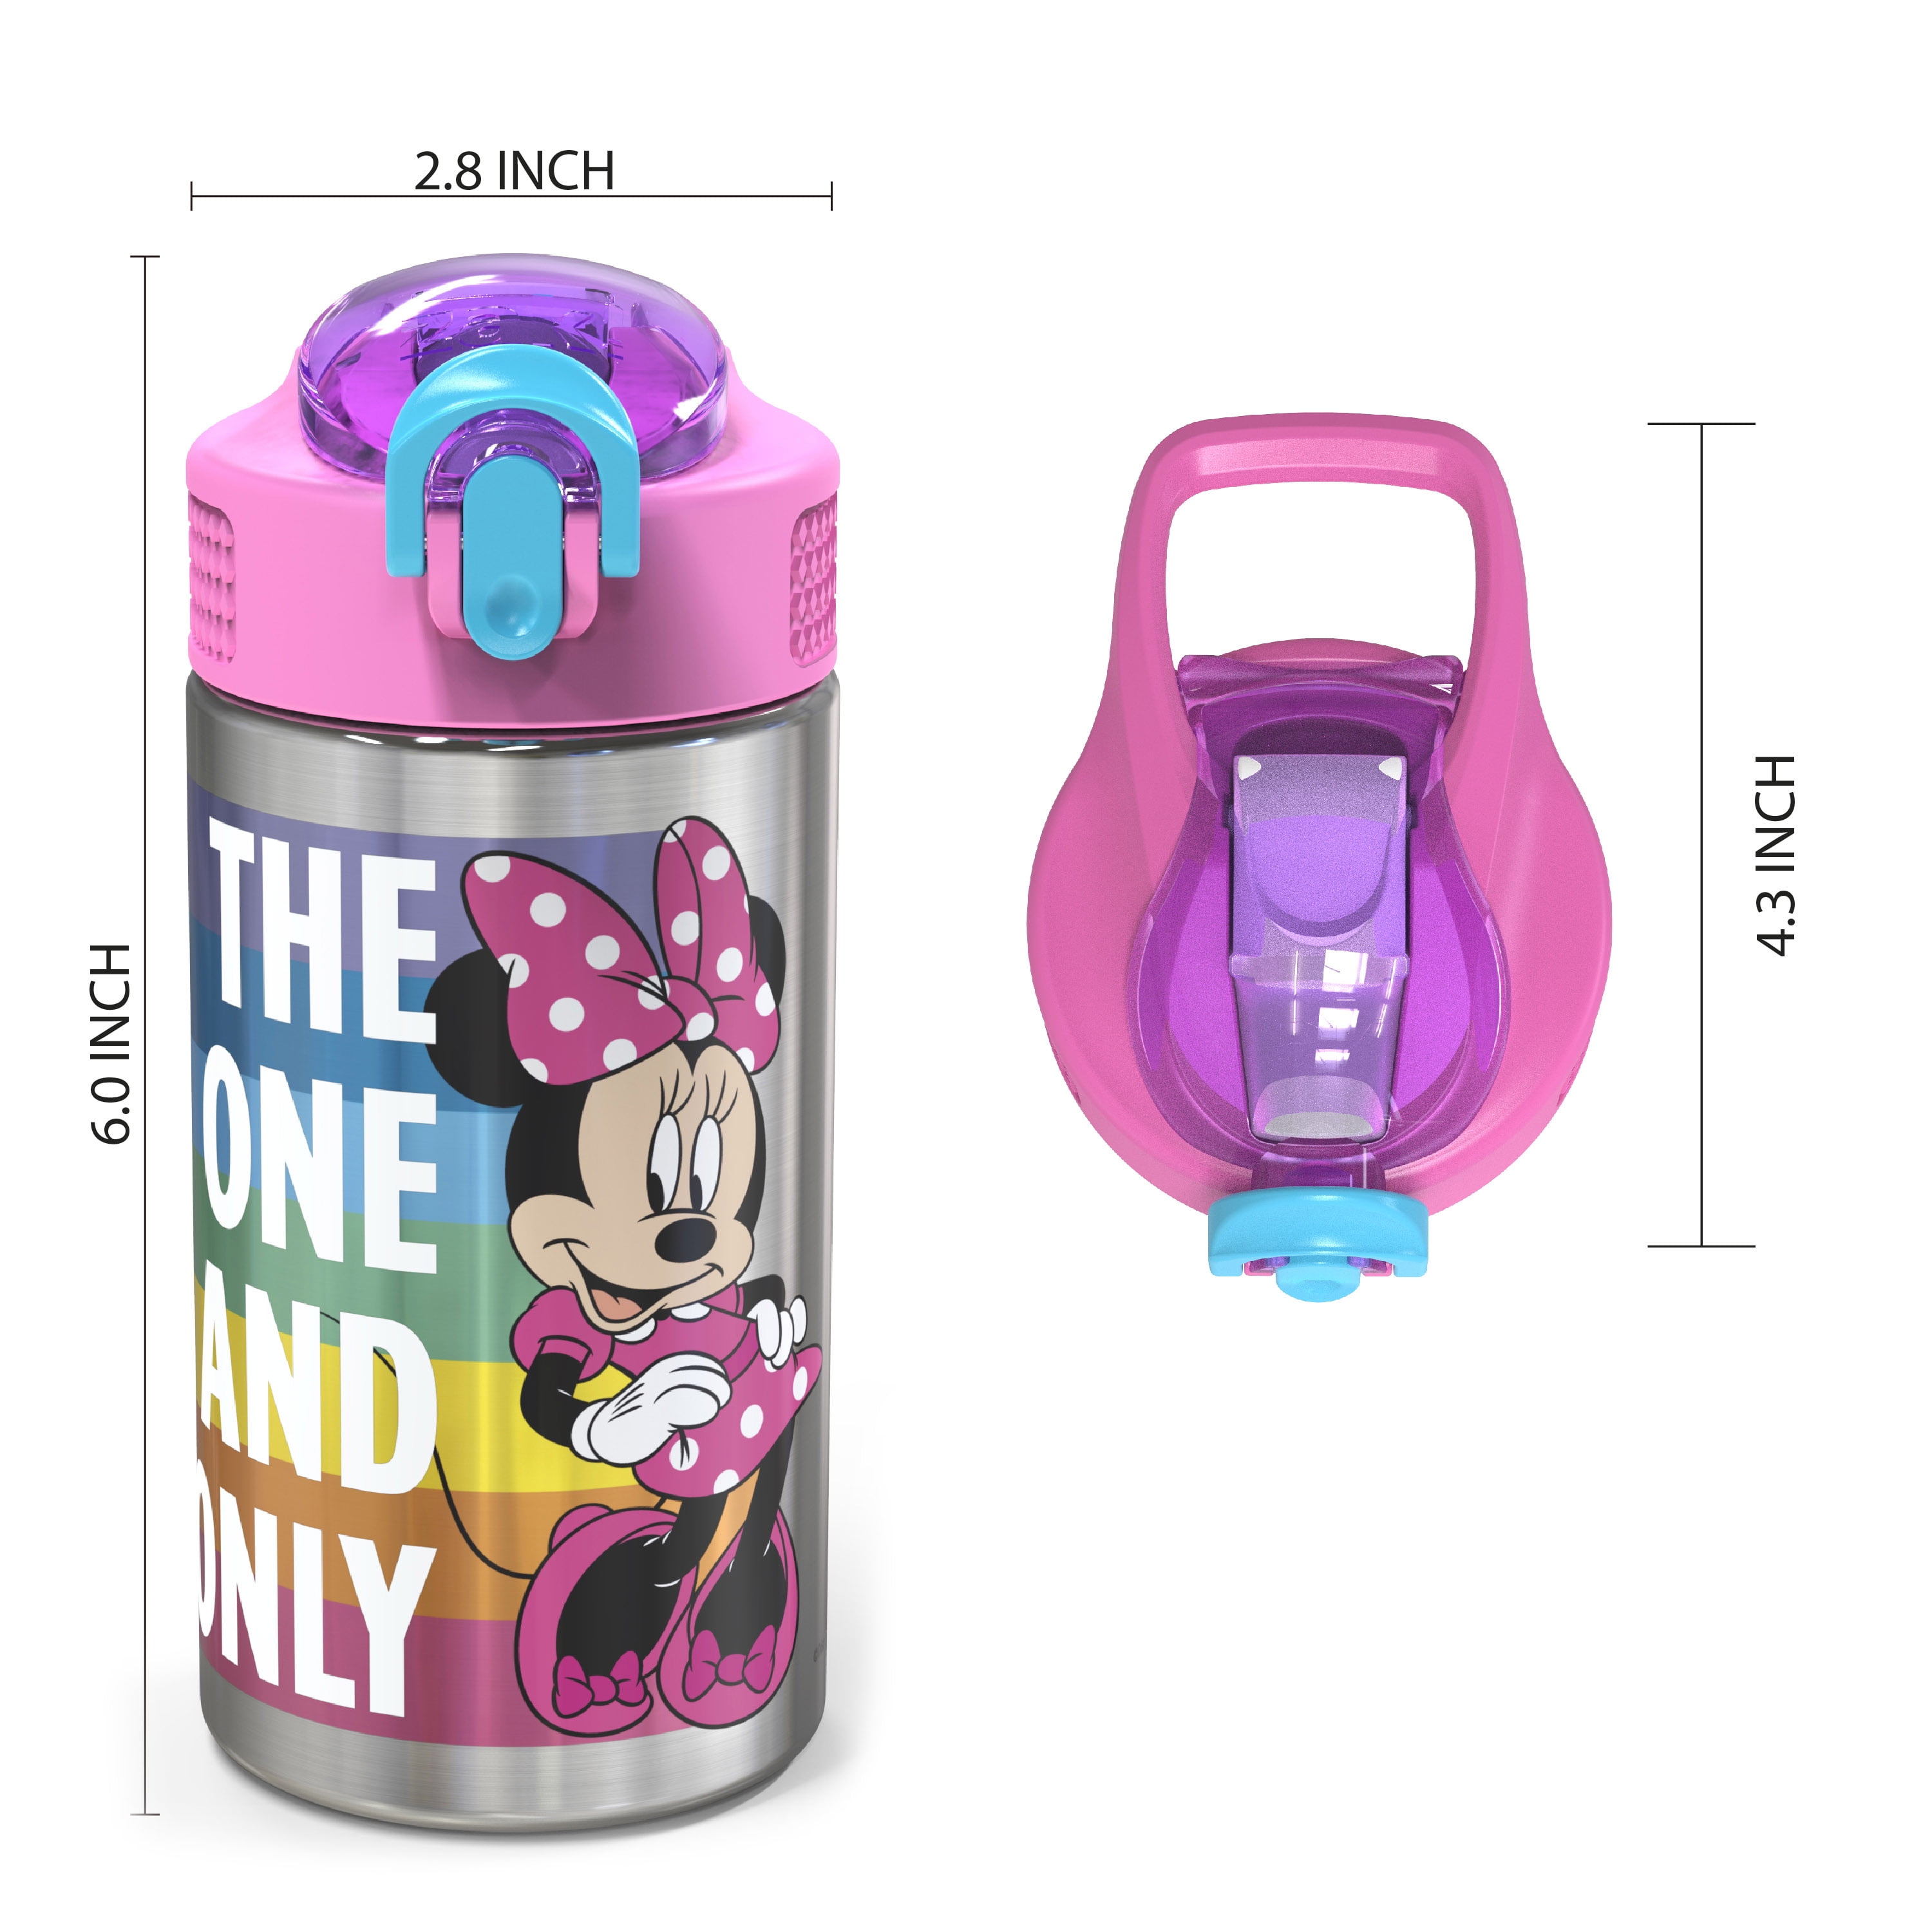  Disney Bundle Minnie Mouse Plastic Water Bottle Set for Girls -  4 pc Bundle with 2 Minnie Reusable Bottles For Home, School, and Sports,  Stickers, and Door Hanger : Home & Kitchen